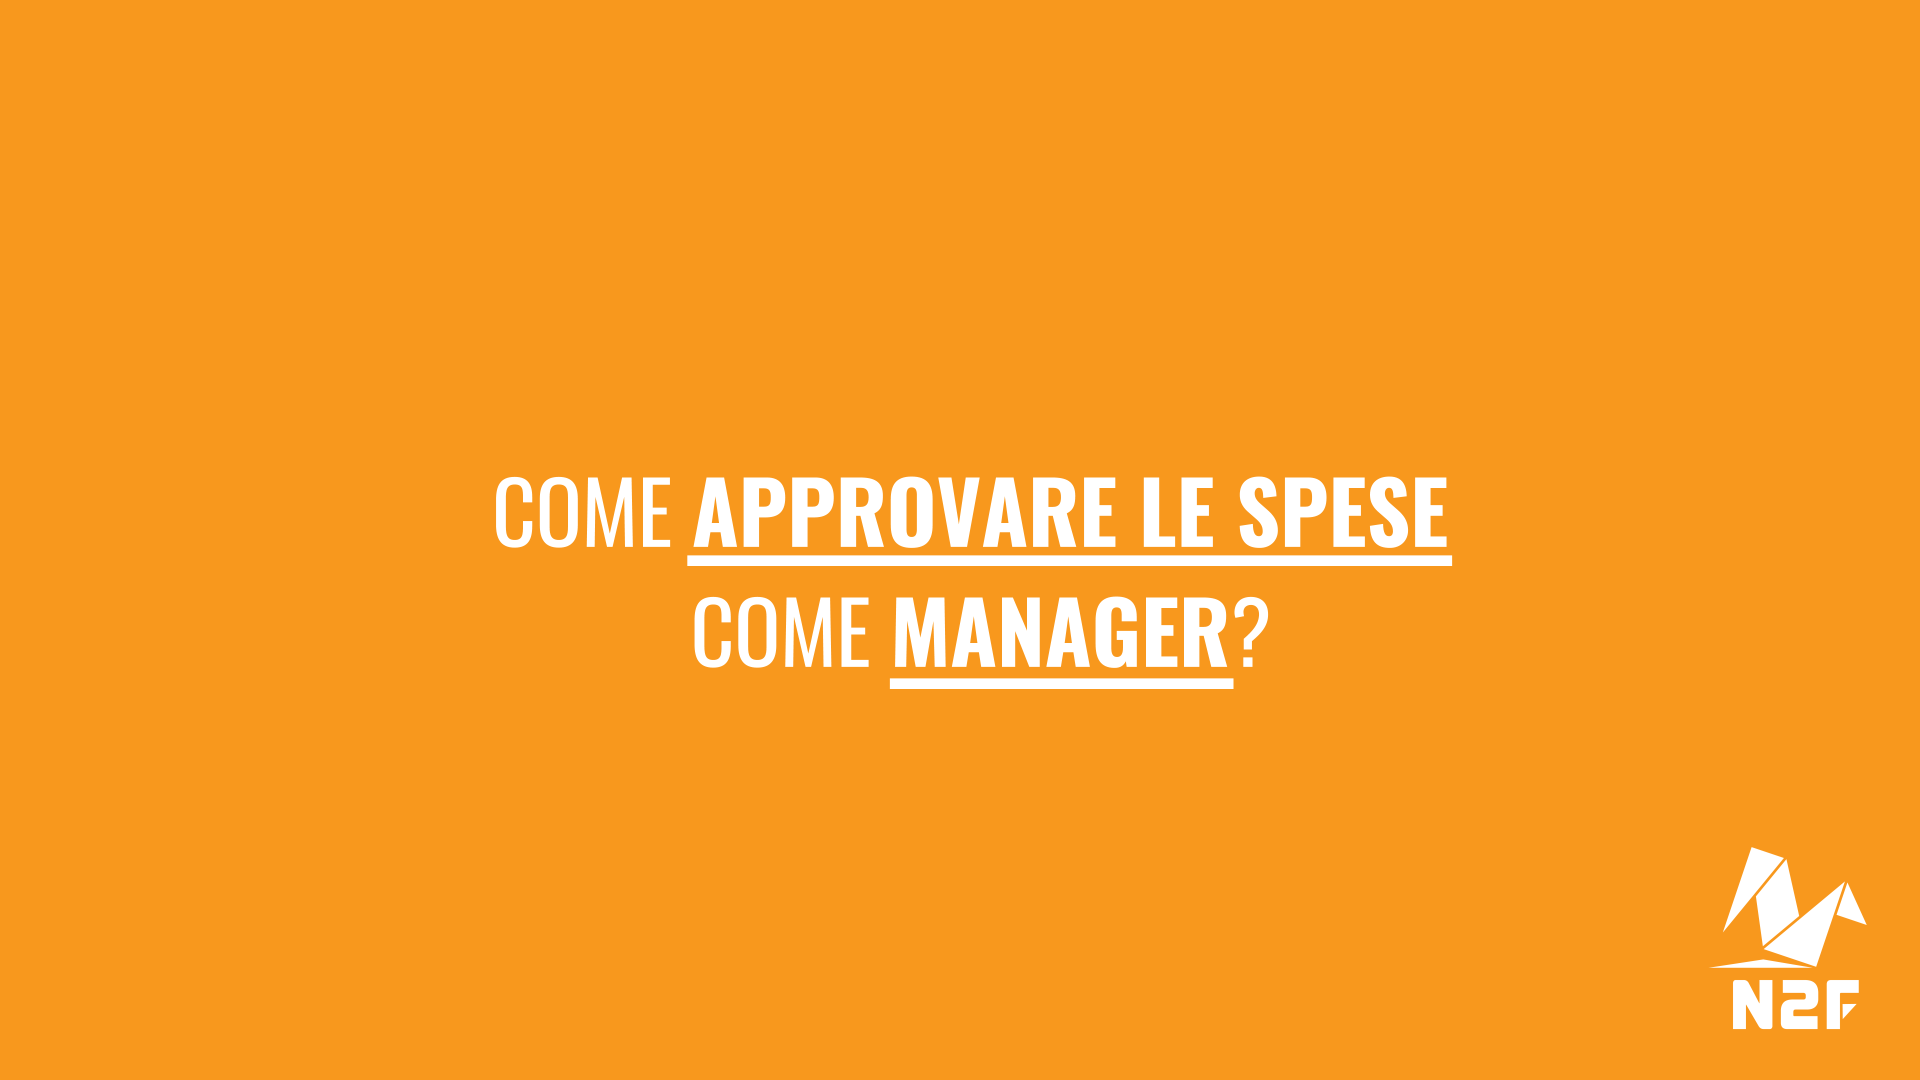 Come approvare le spese come manager?